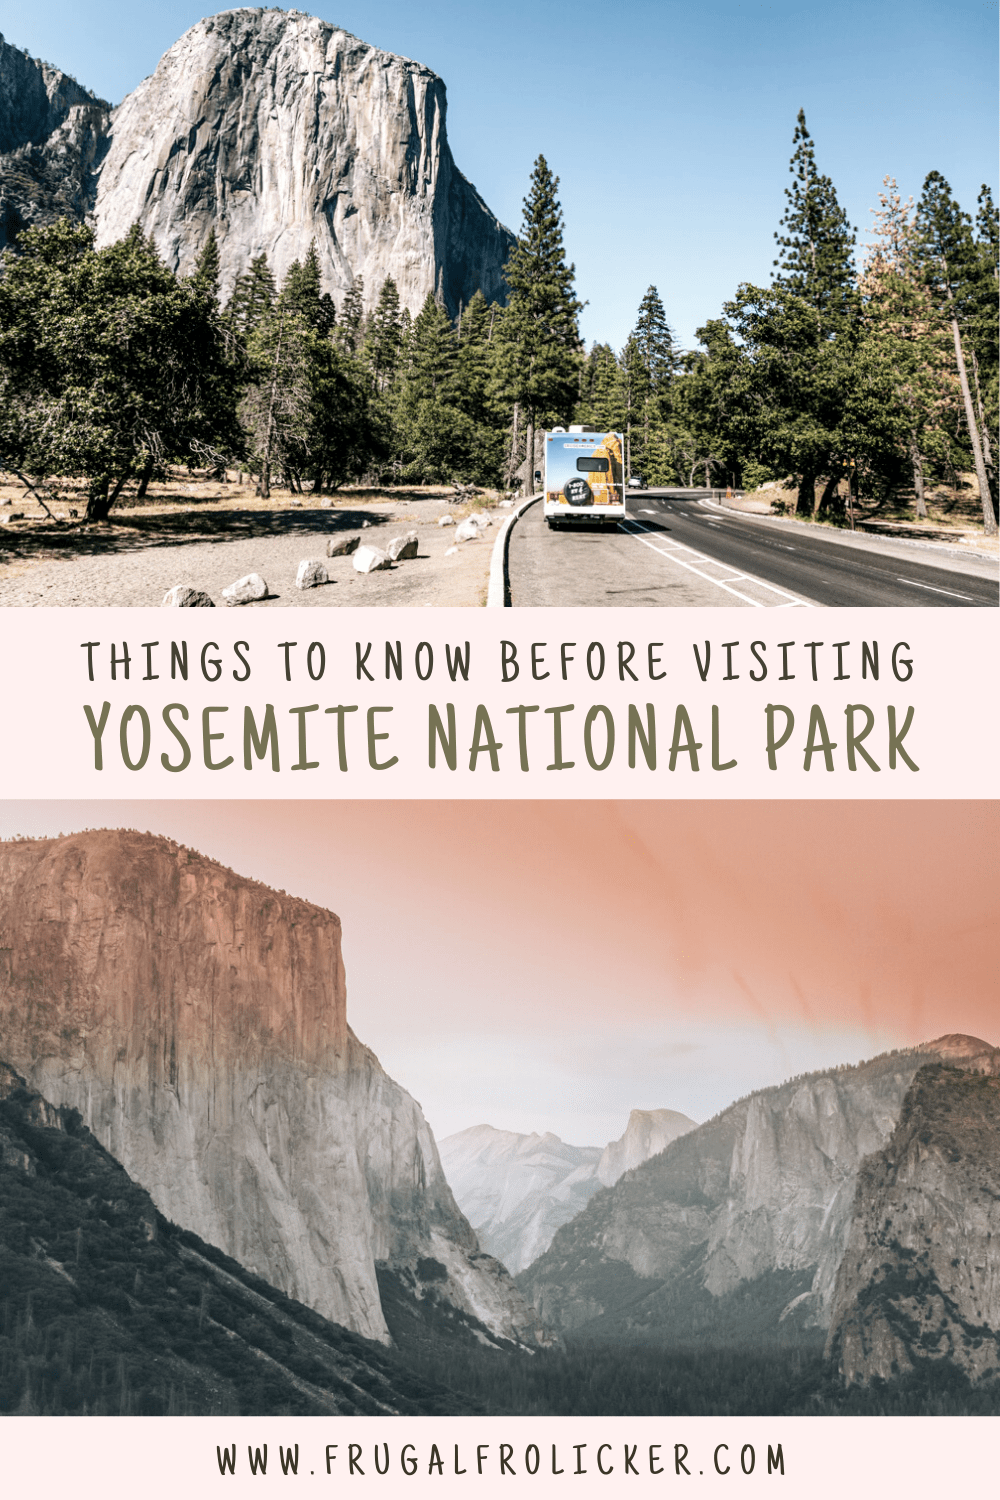 Things to Know Before Visiting Yosemite National Park